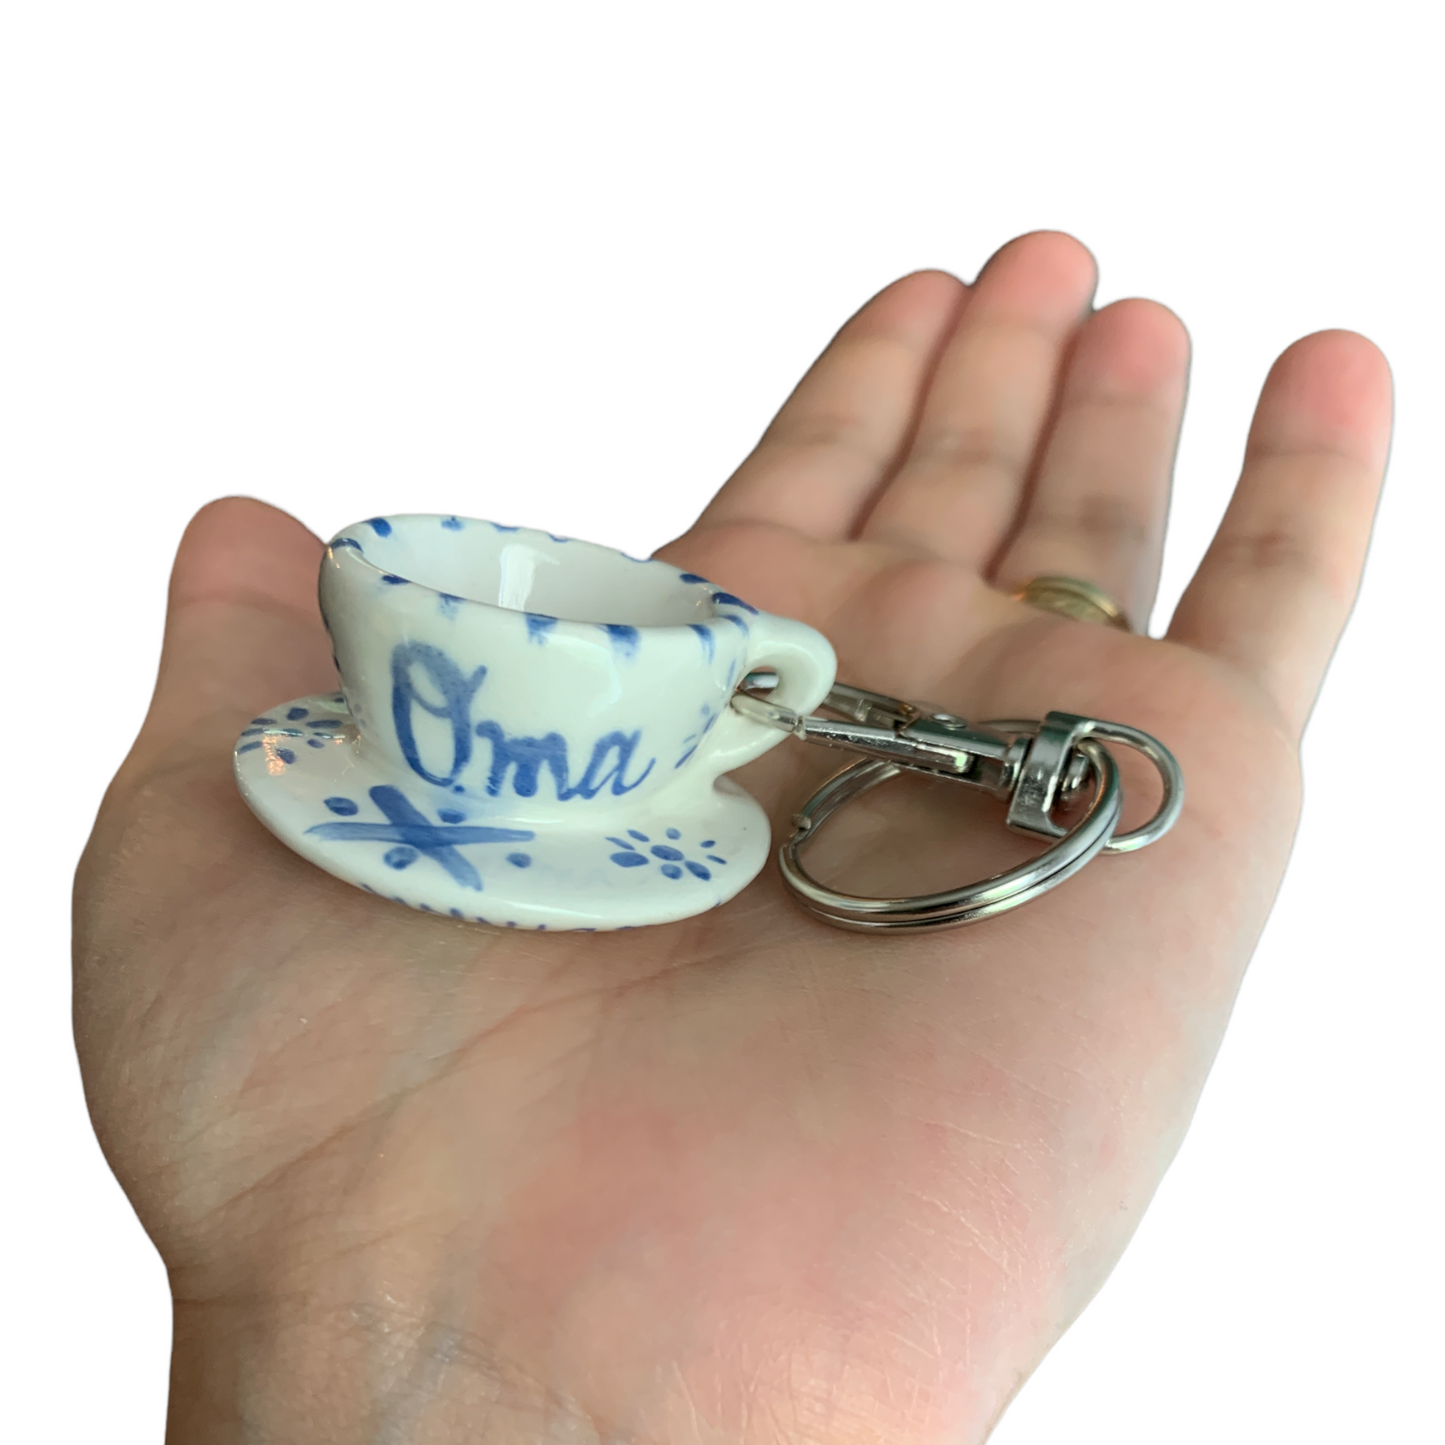 Teacup keychain - personalized